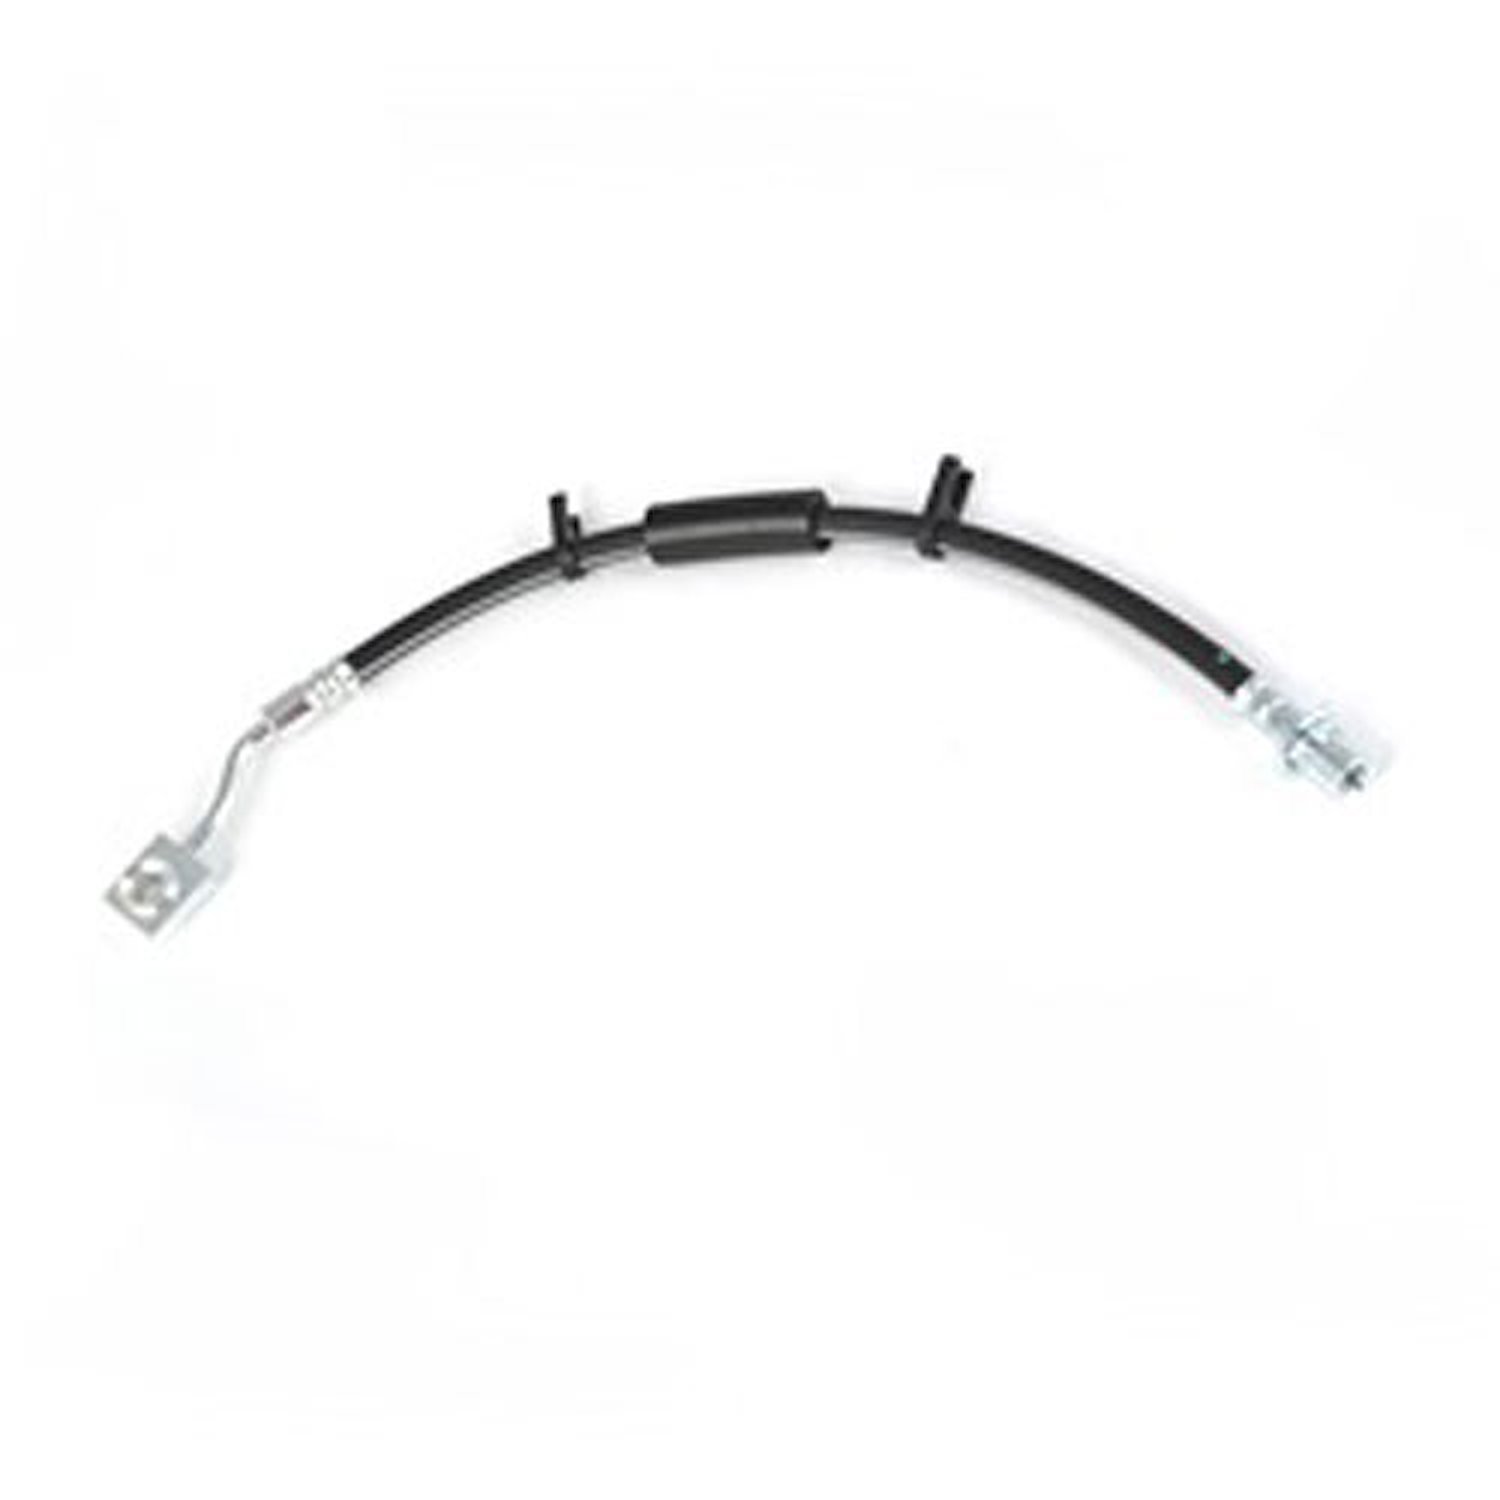 This right rear brake hose from Omix-ADA fits 03-06 Jeep Wranglers with disc brakes.